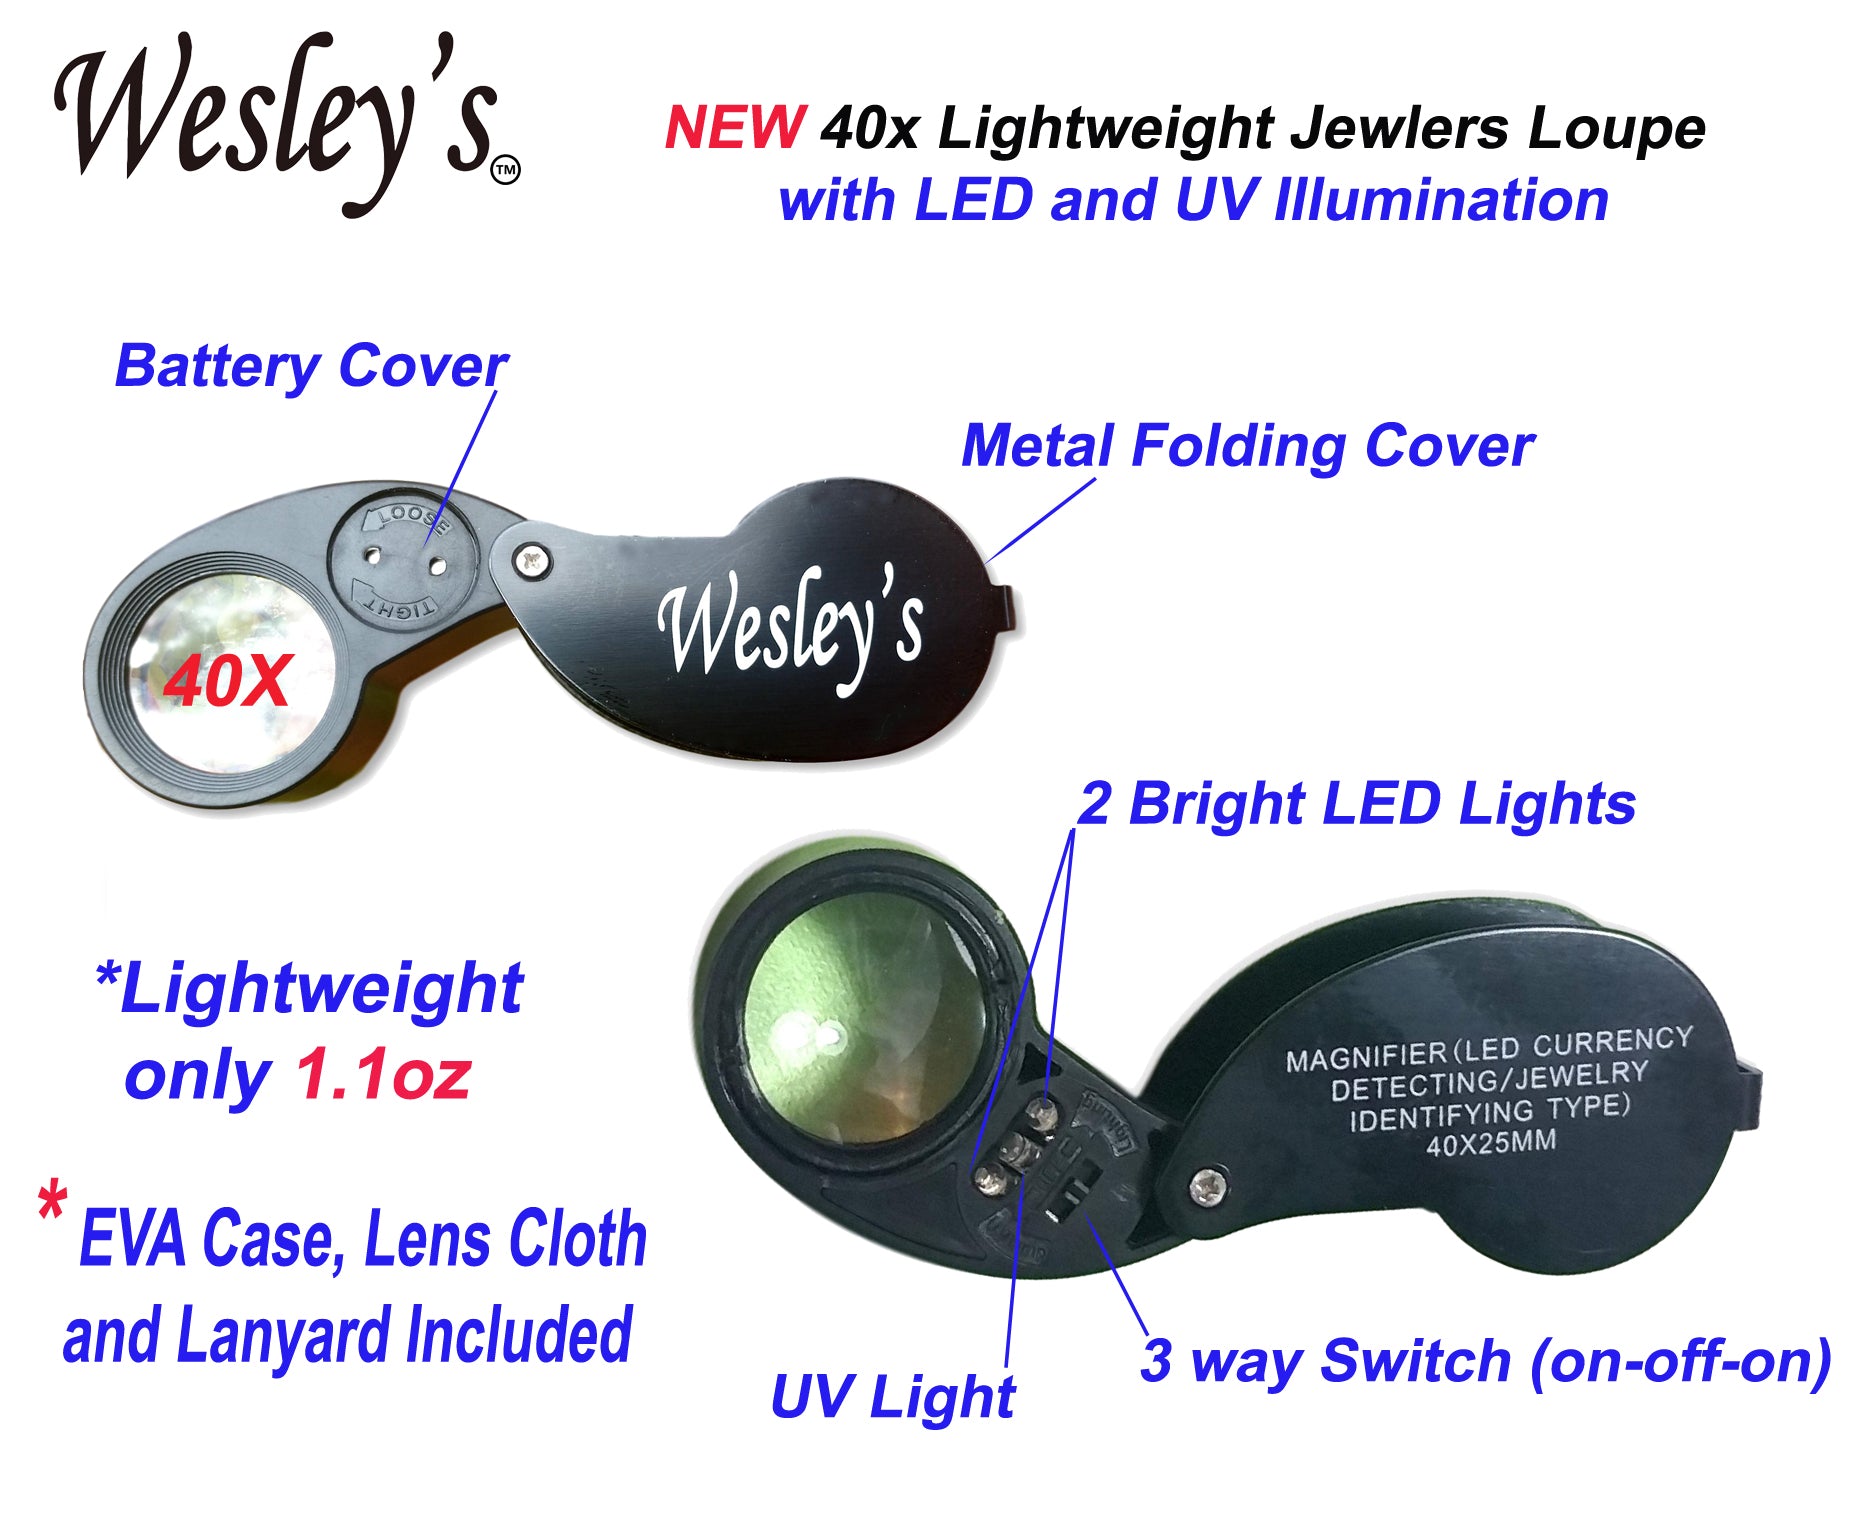 Jewelers Loupe 30X 60X LED Illuminated - Jewelry Loop Magnifier with Case  for Geology, Gems, Gardening, Electronics, Industrial by Wesley's as you